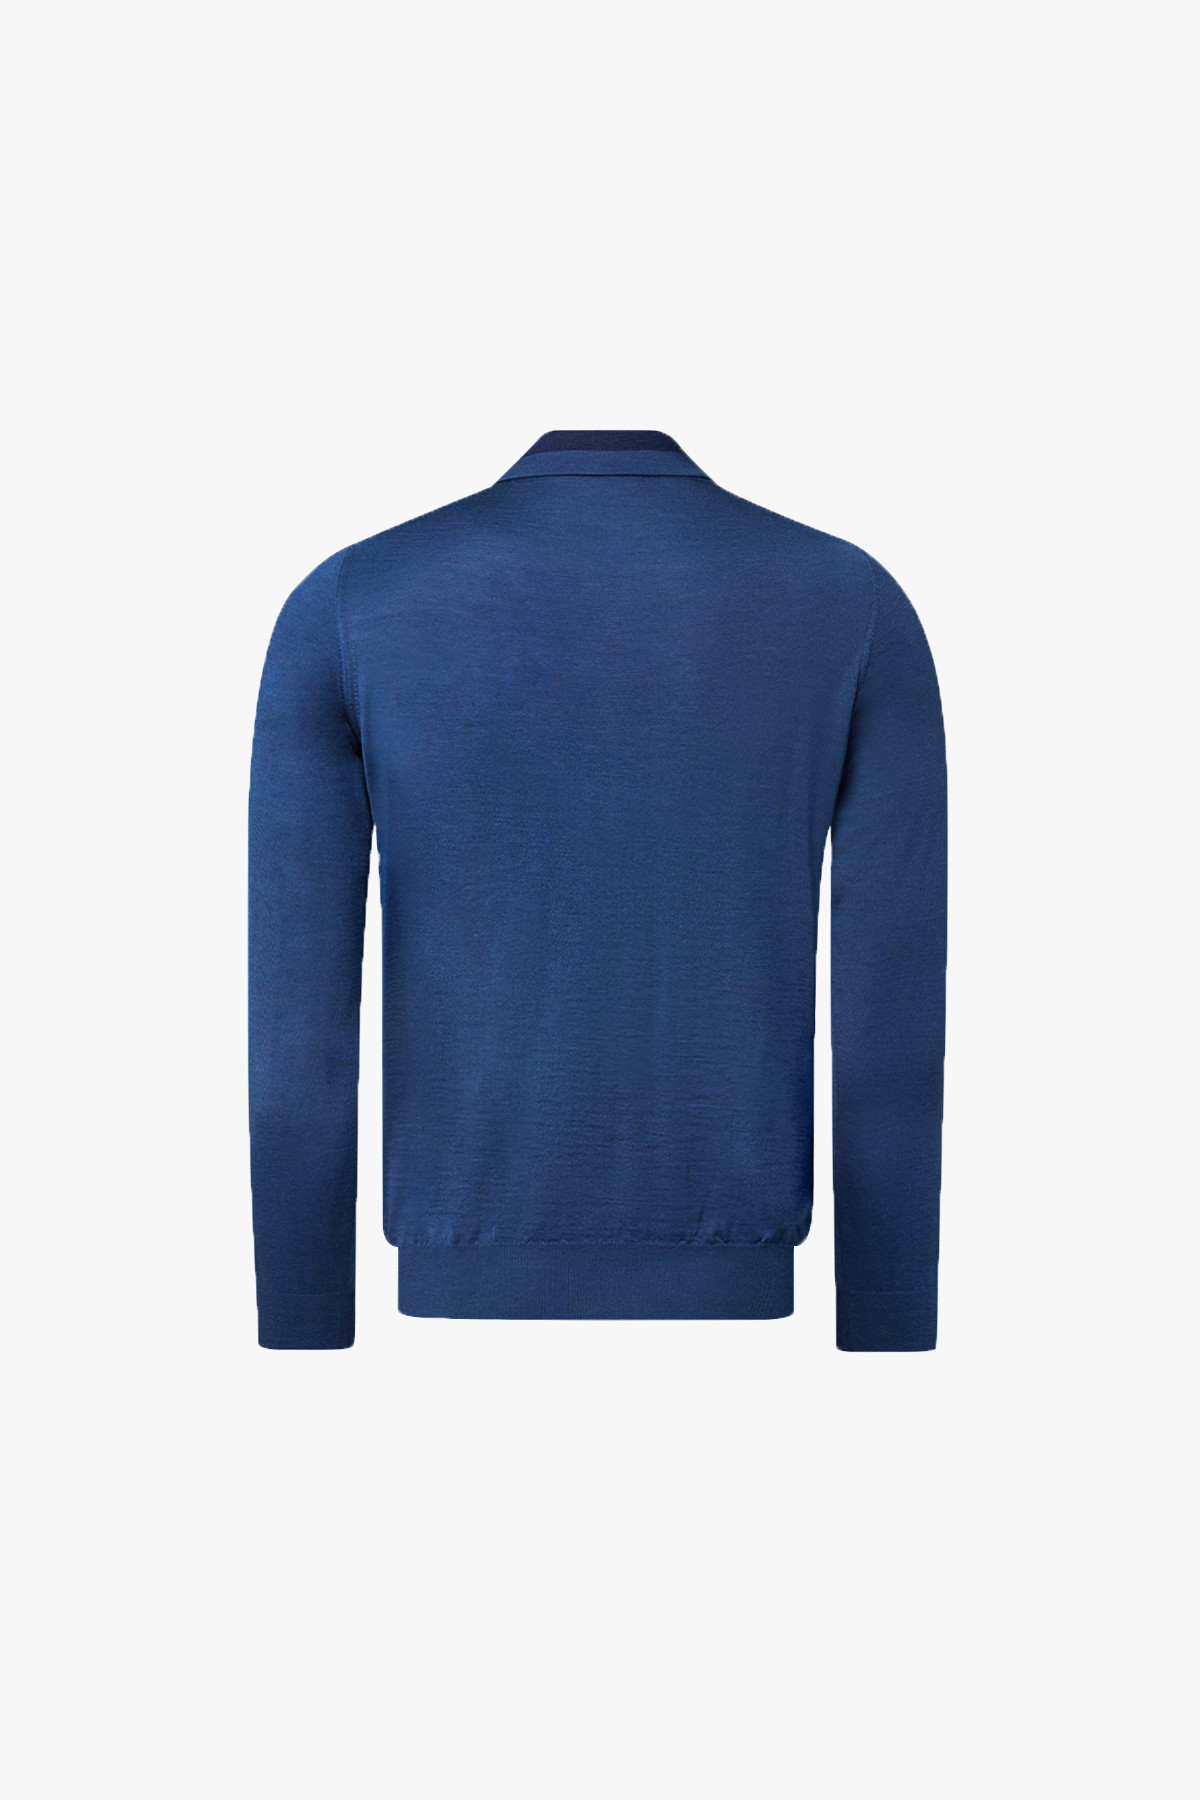 Blue abyss zipped polo shirt, long sleeves